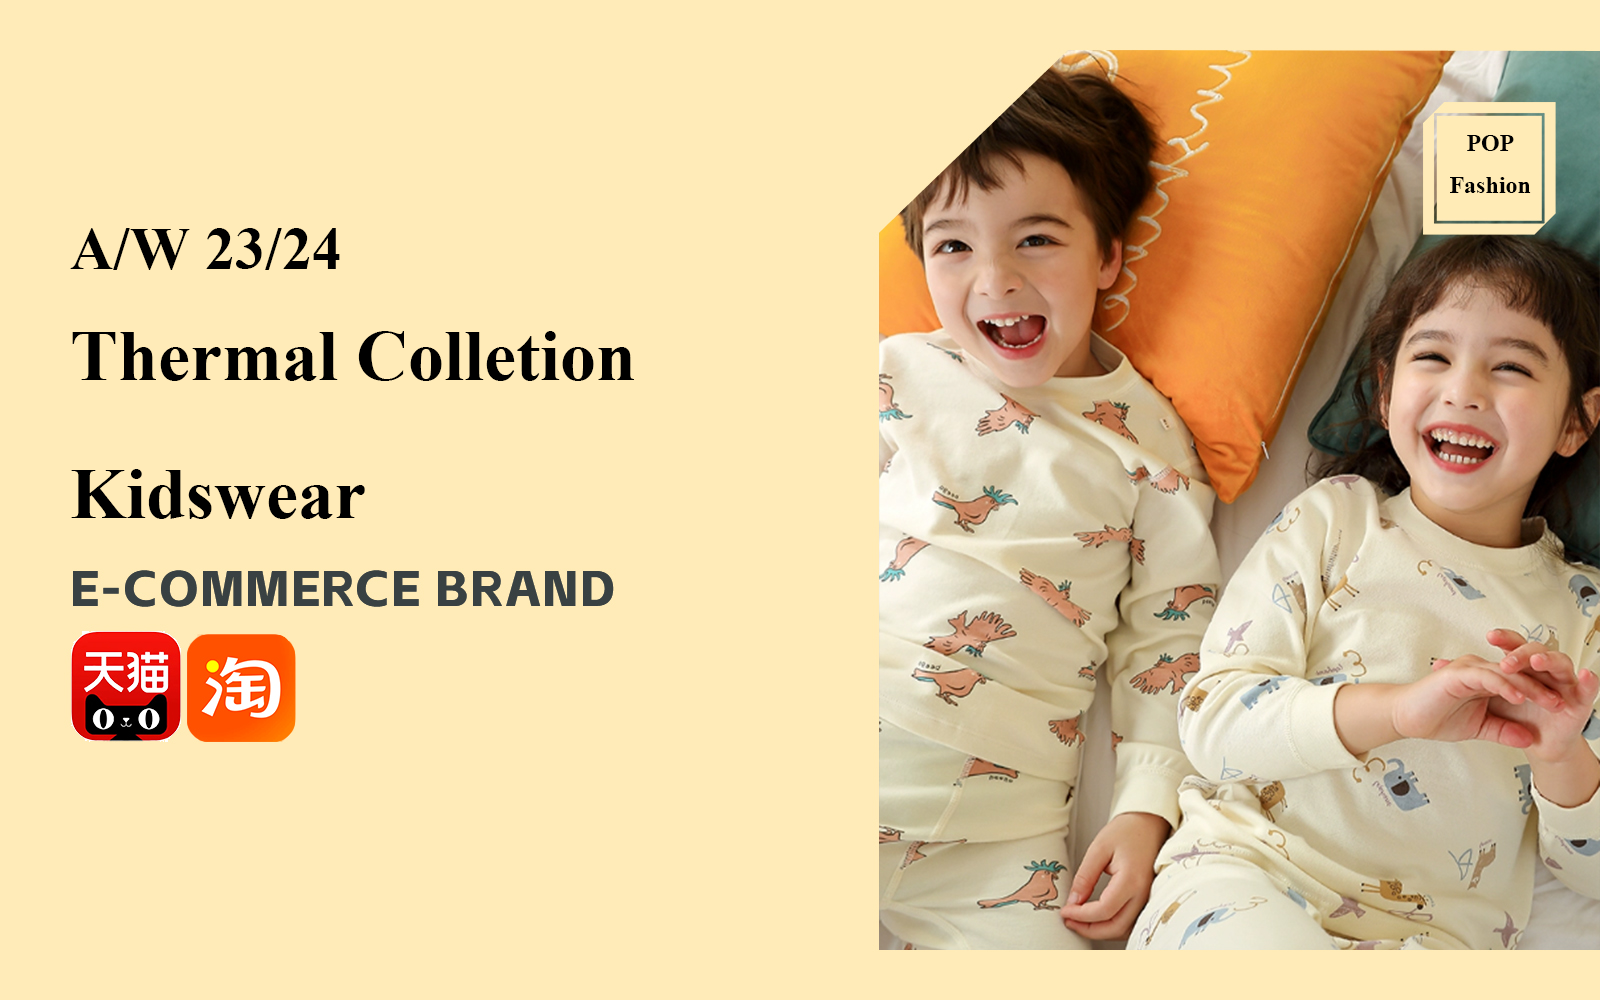 Thermal Collection -- The Comprehensive Analysis of E-commerce Kidswear Brand